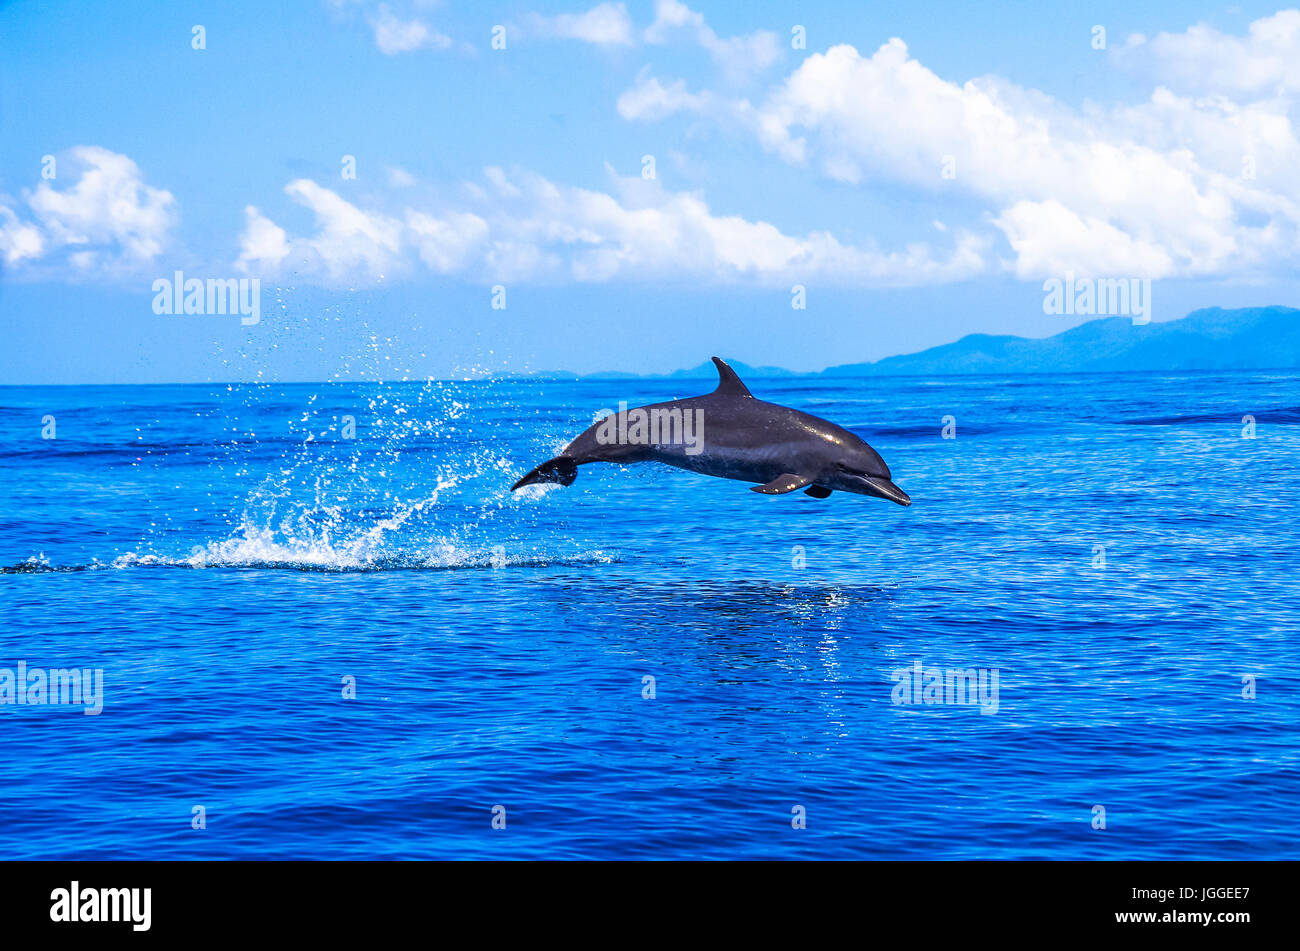 Dolphin jumping out of the water image taken in the Pacific ocean close to Coiba island in Panama Stock Photo